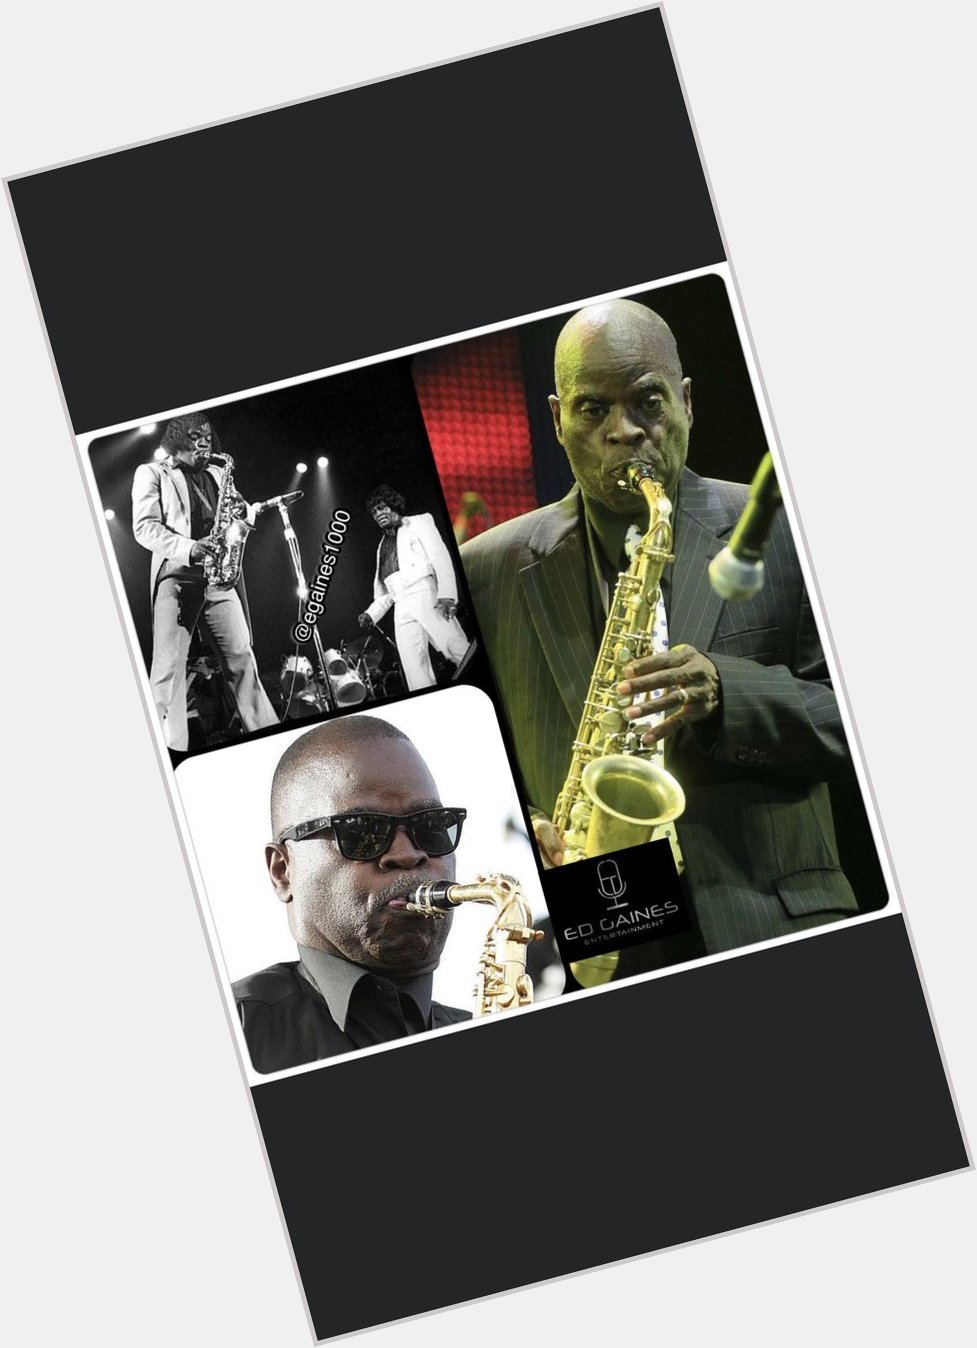 Happy Birthday Funk &Soul Saxophonist Maceo Parker. Worked with James Brown, Parliament Funkadelic & Prince. 